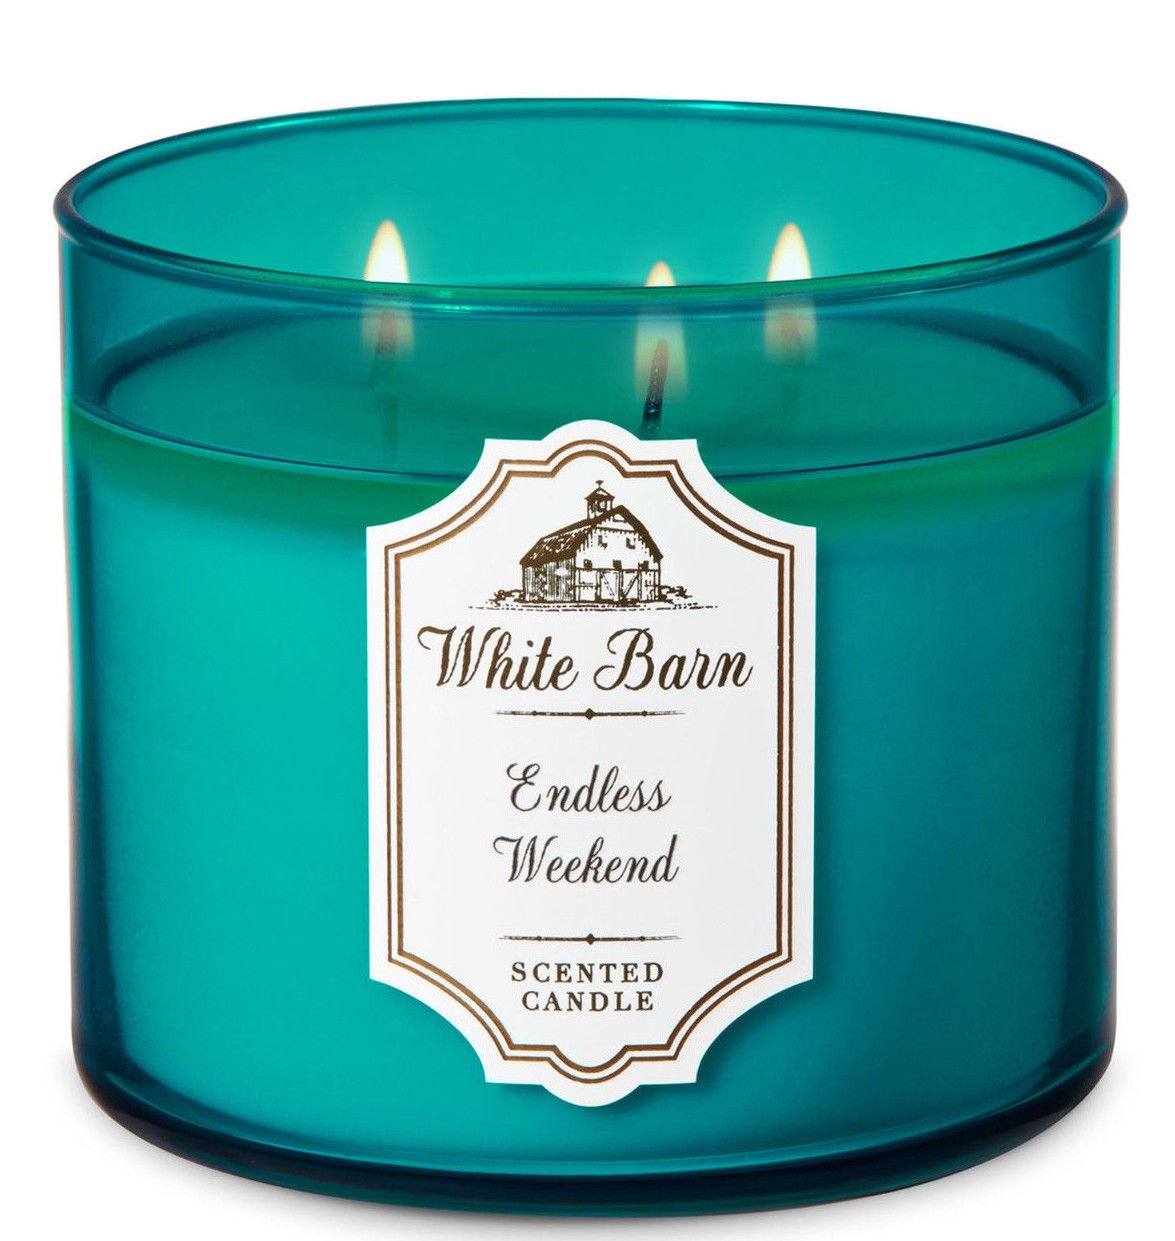 White Barn Endless Weekend Three Wick 14.5 Ounces Scented Candle